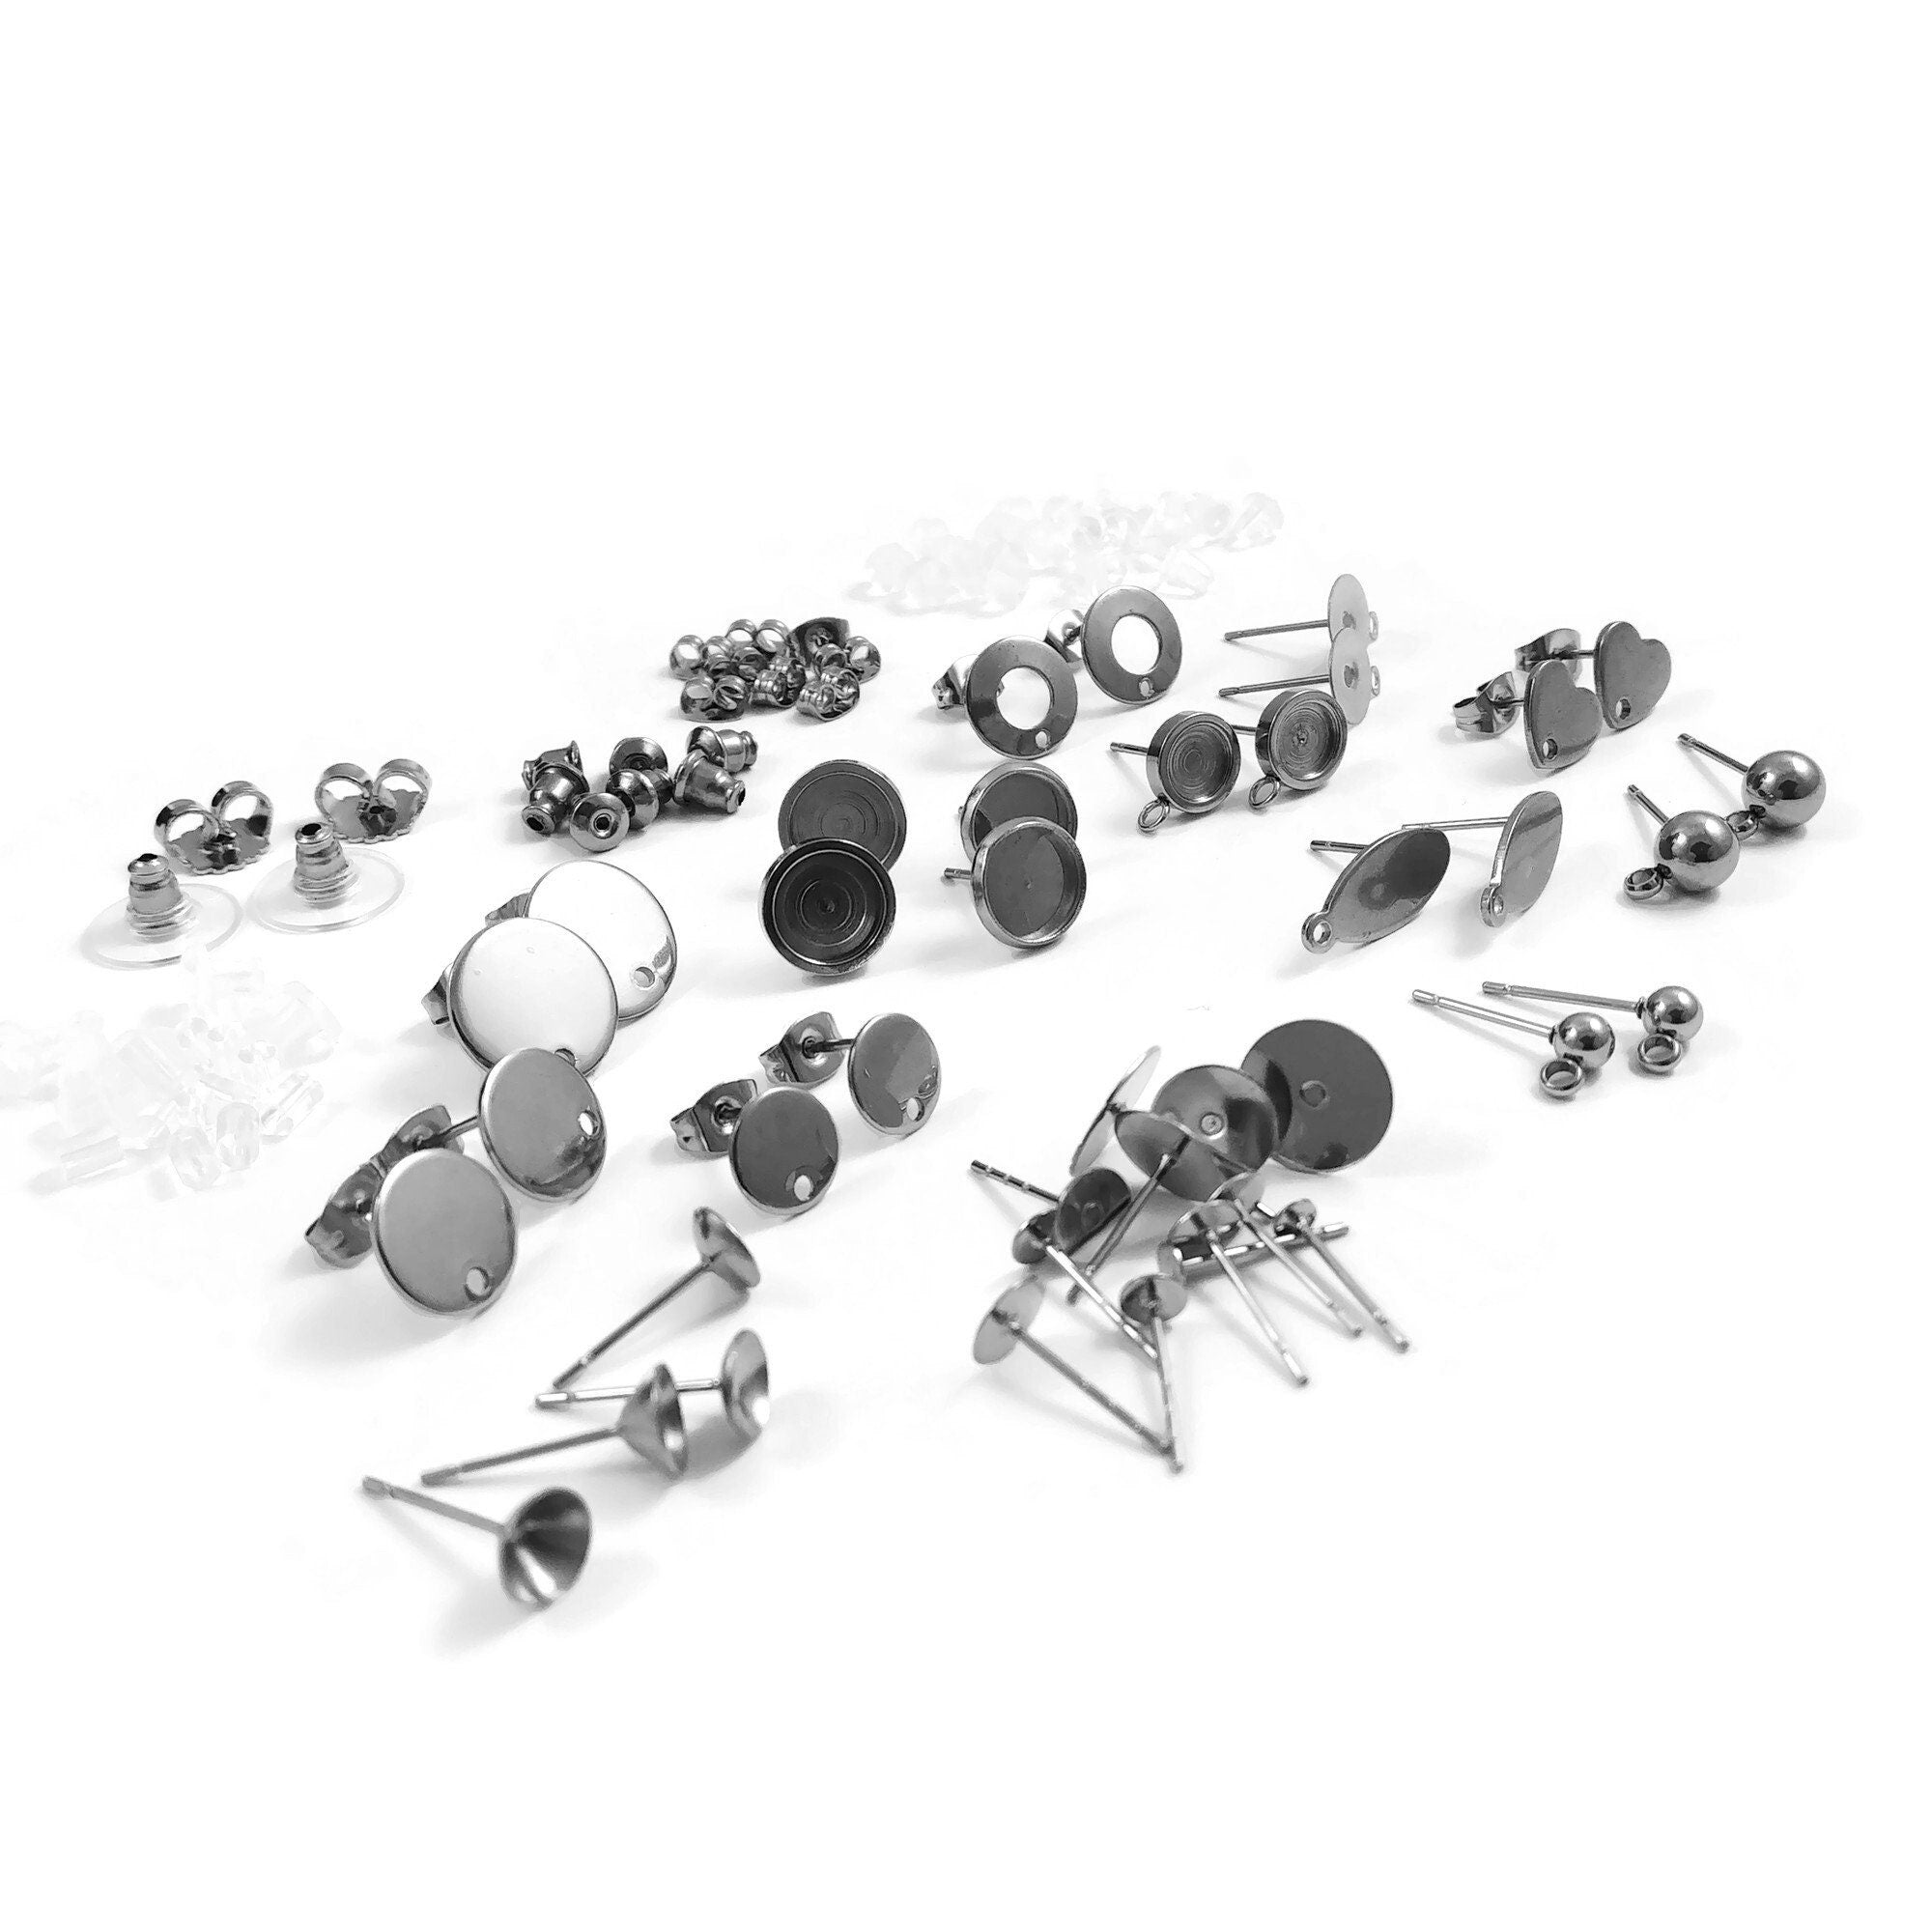 Black Earrings-100pcs 50 Pairs Silver Plated 10mm Flat-pad Earring Posts  and Backs Diy Jewelry Finding Supplies 